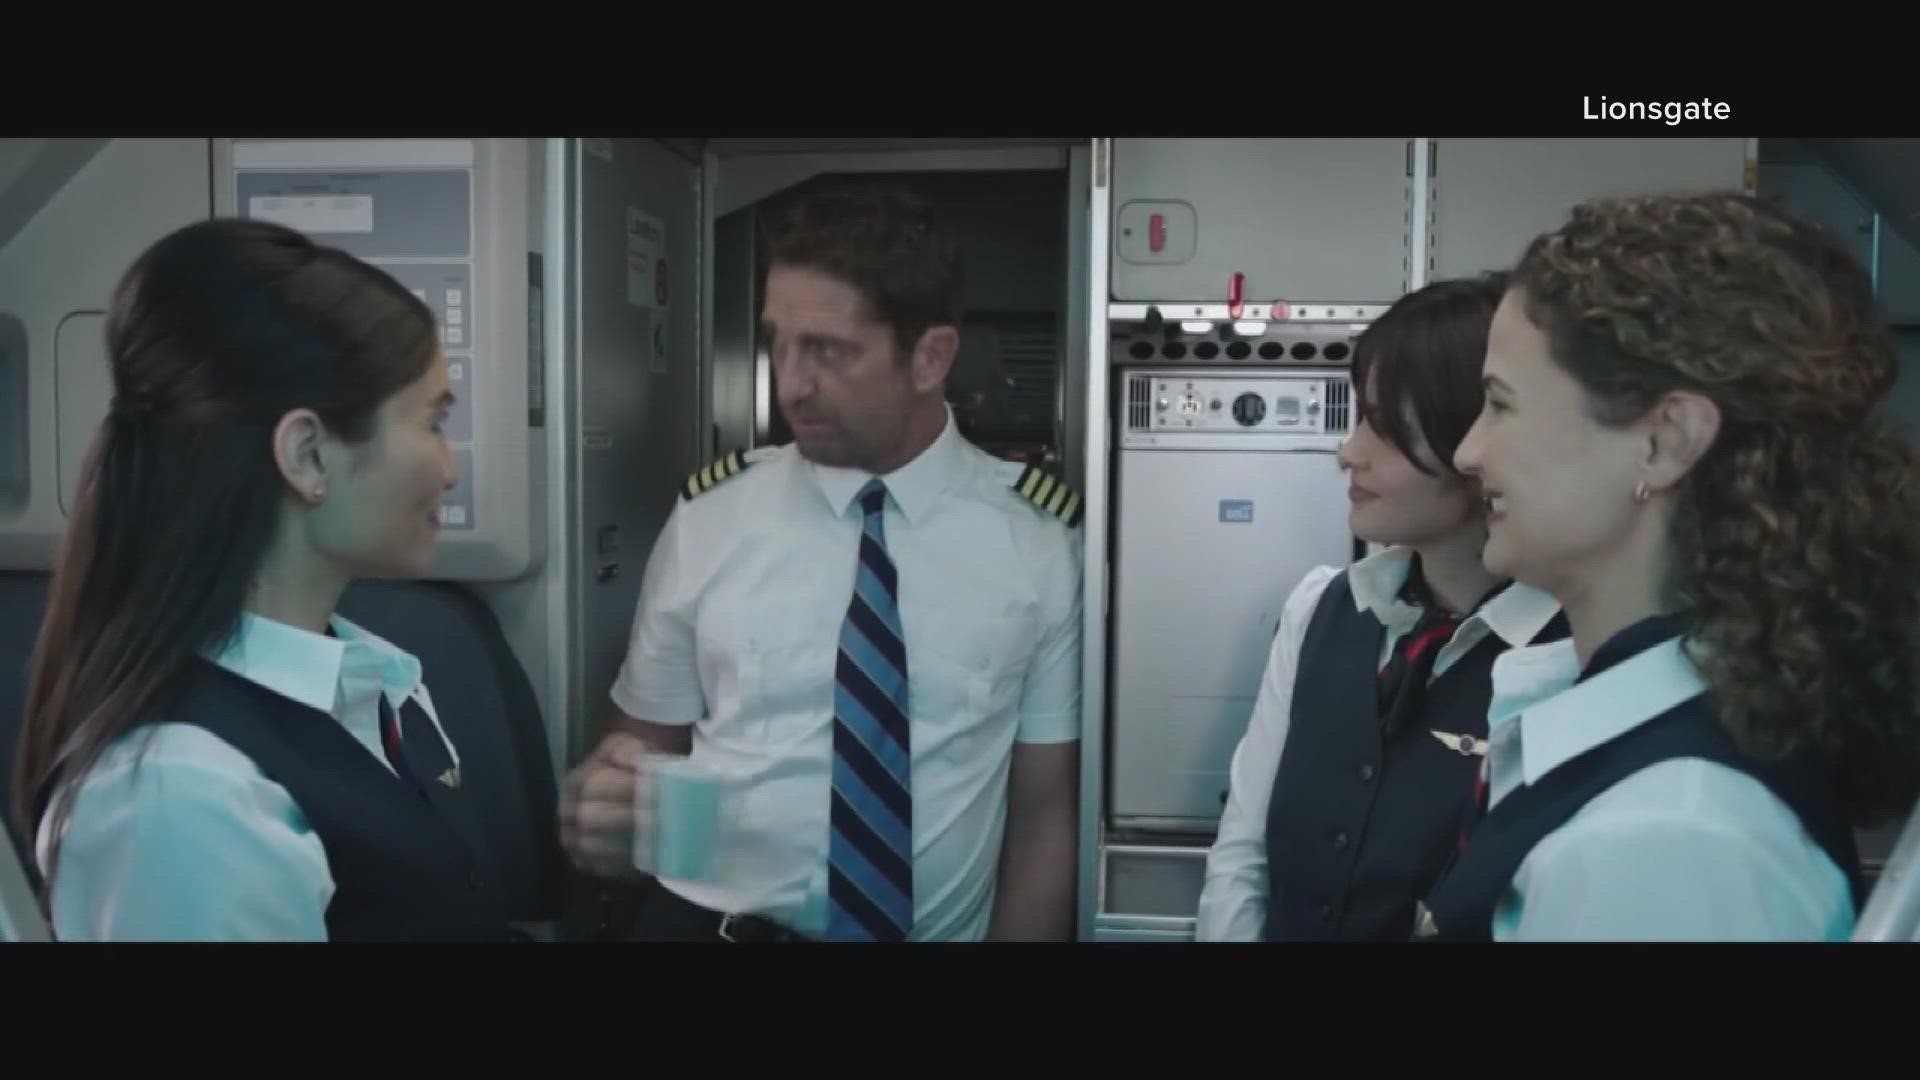 This latest offering in "Plane" might just be worth checking out for fans of popcorn flicks.